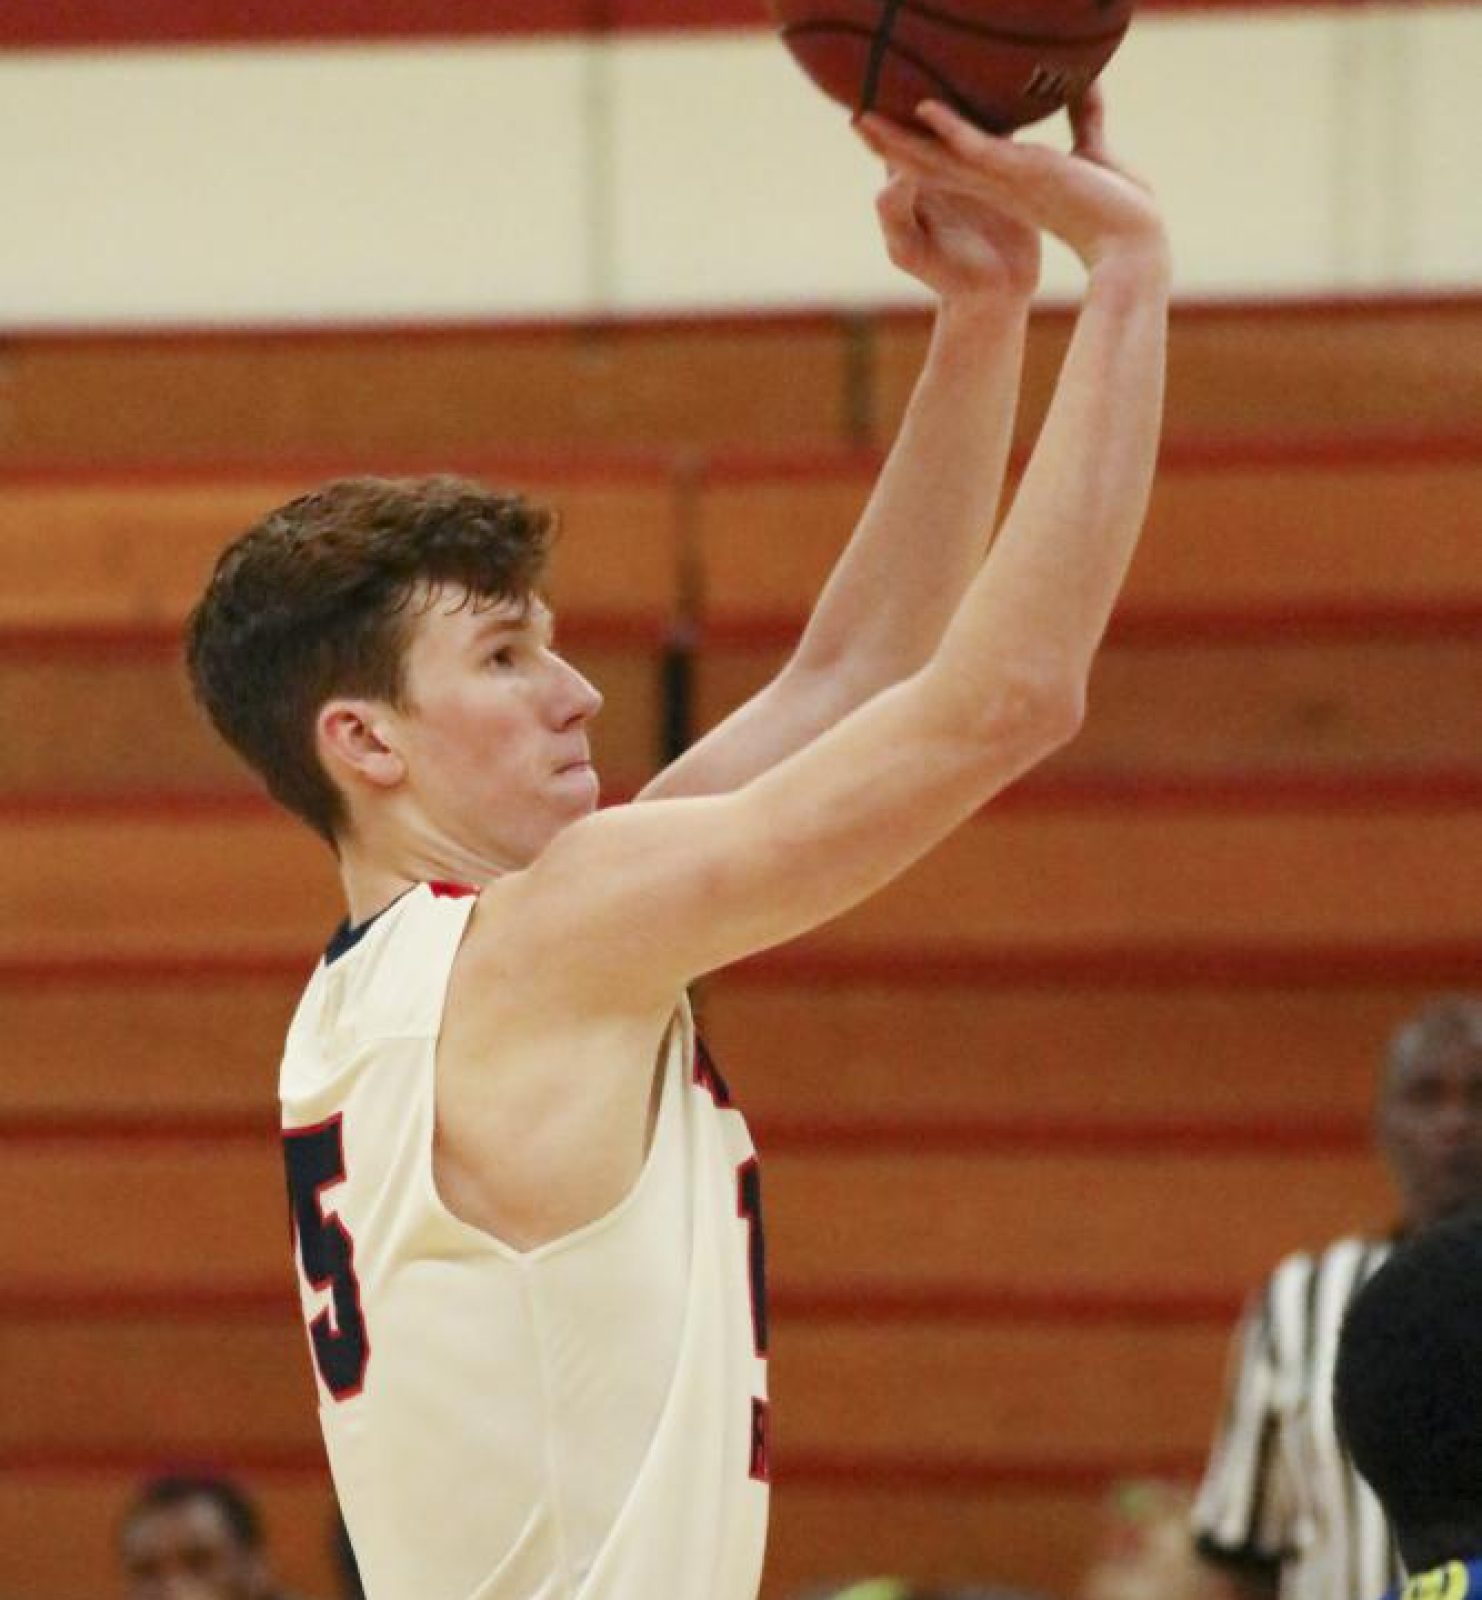 American River College freshman Jase Giorgi takes a free throw against Merritt Community College during the first round of the NorCal Regional Playoffs at ARC on Feb. 27, 2019. (Photo by Jennah Booth)